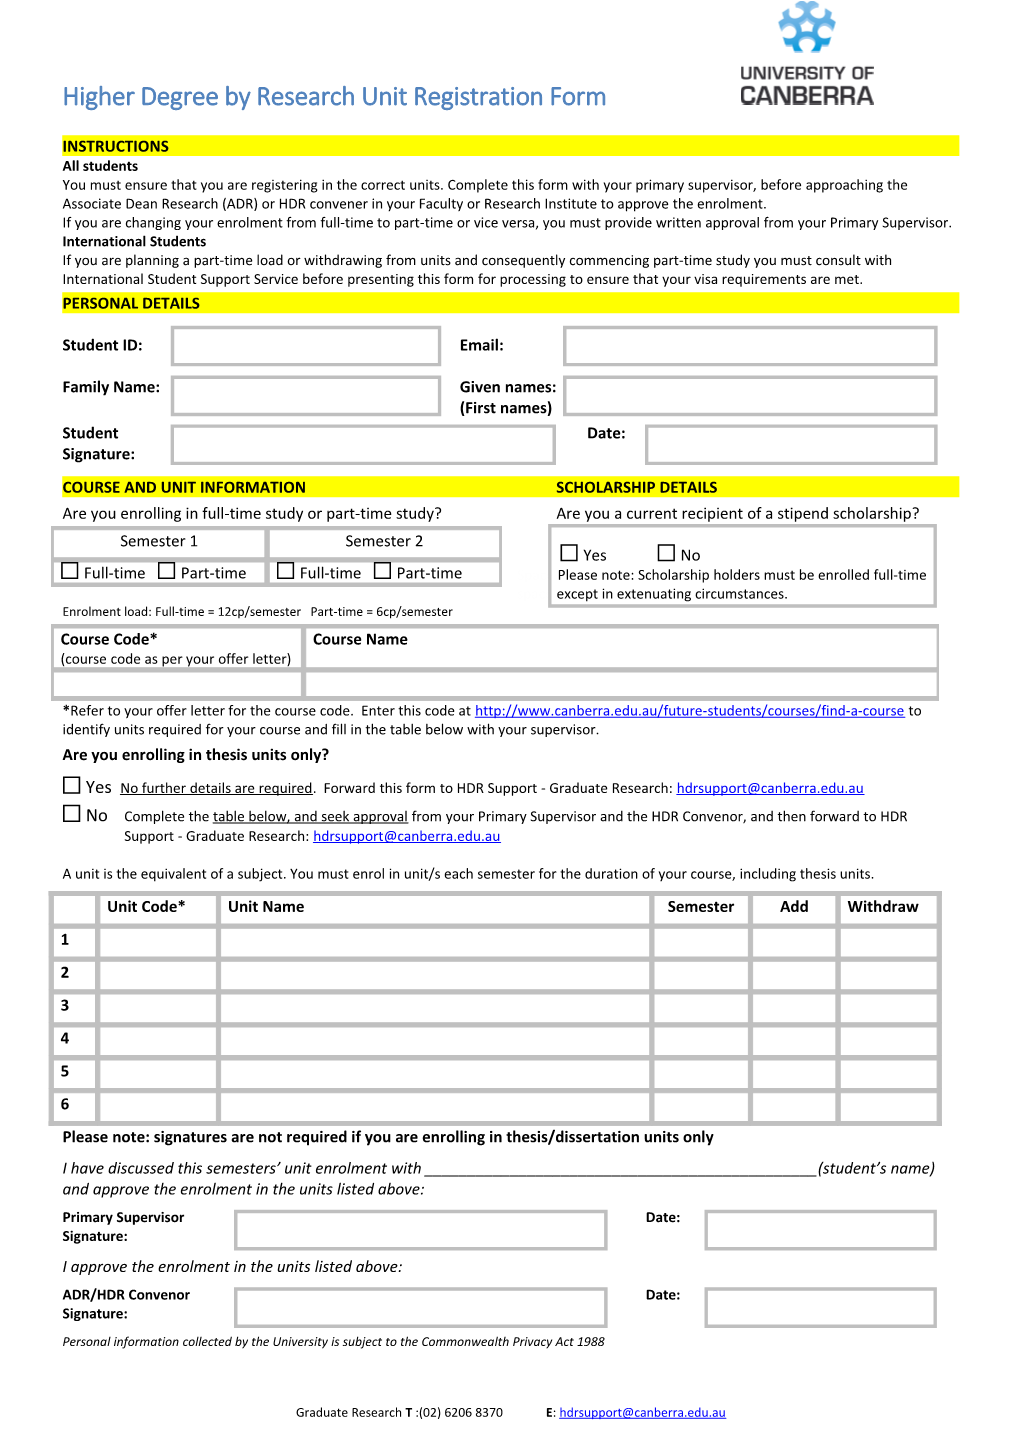 Higher Degree by Research Unit Registration Form